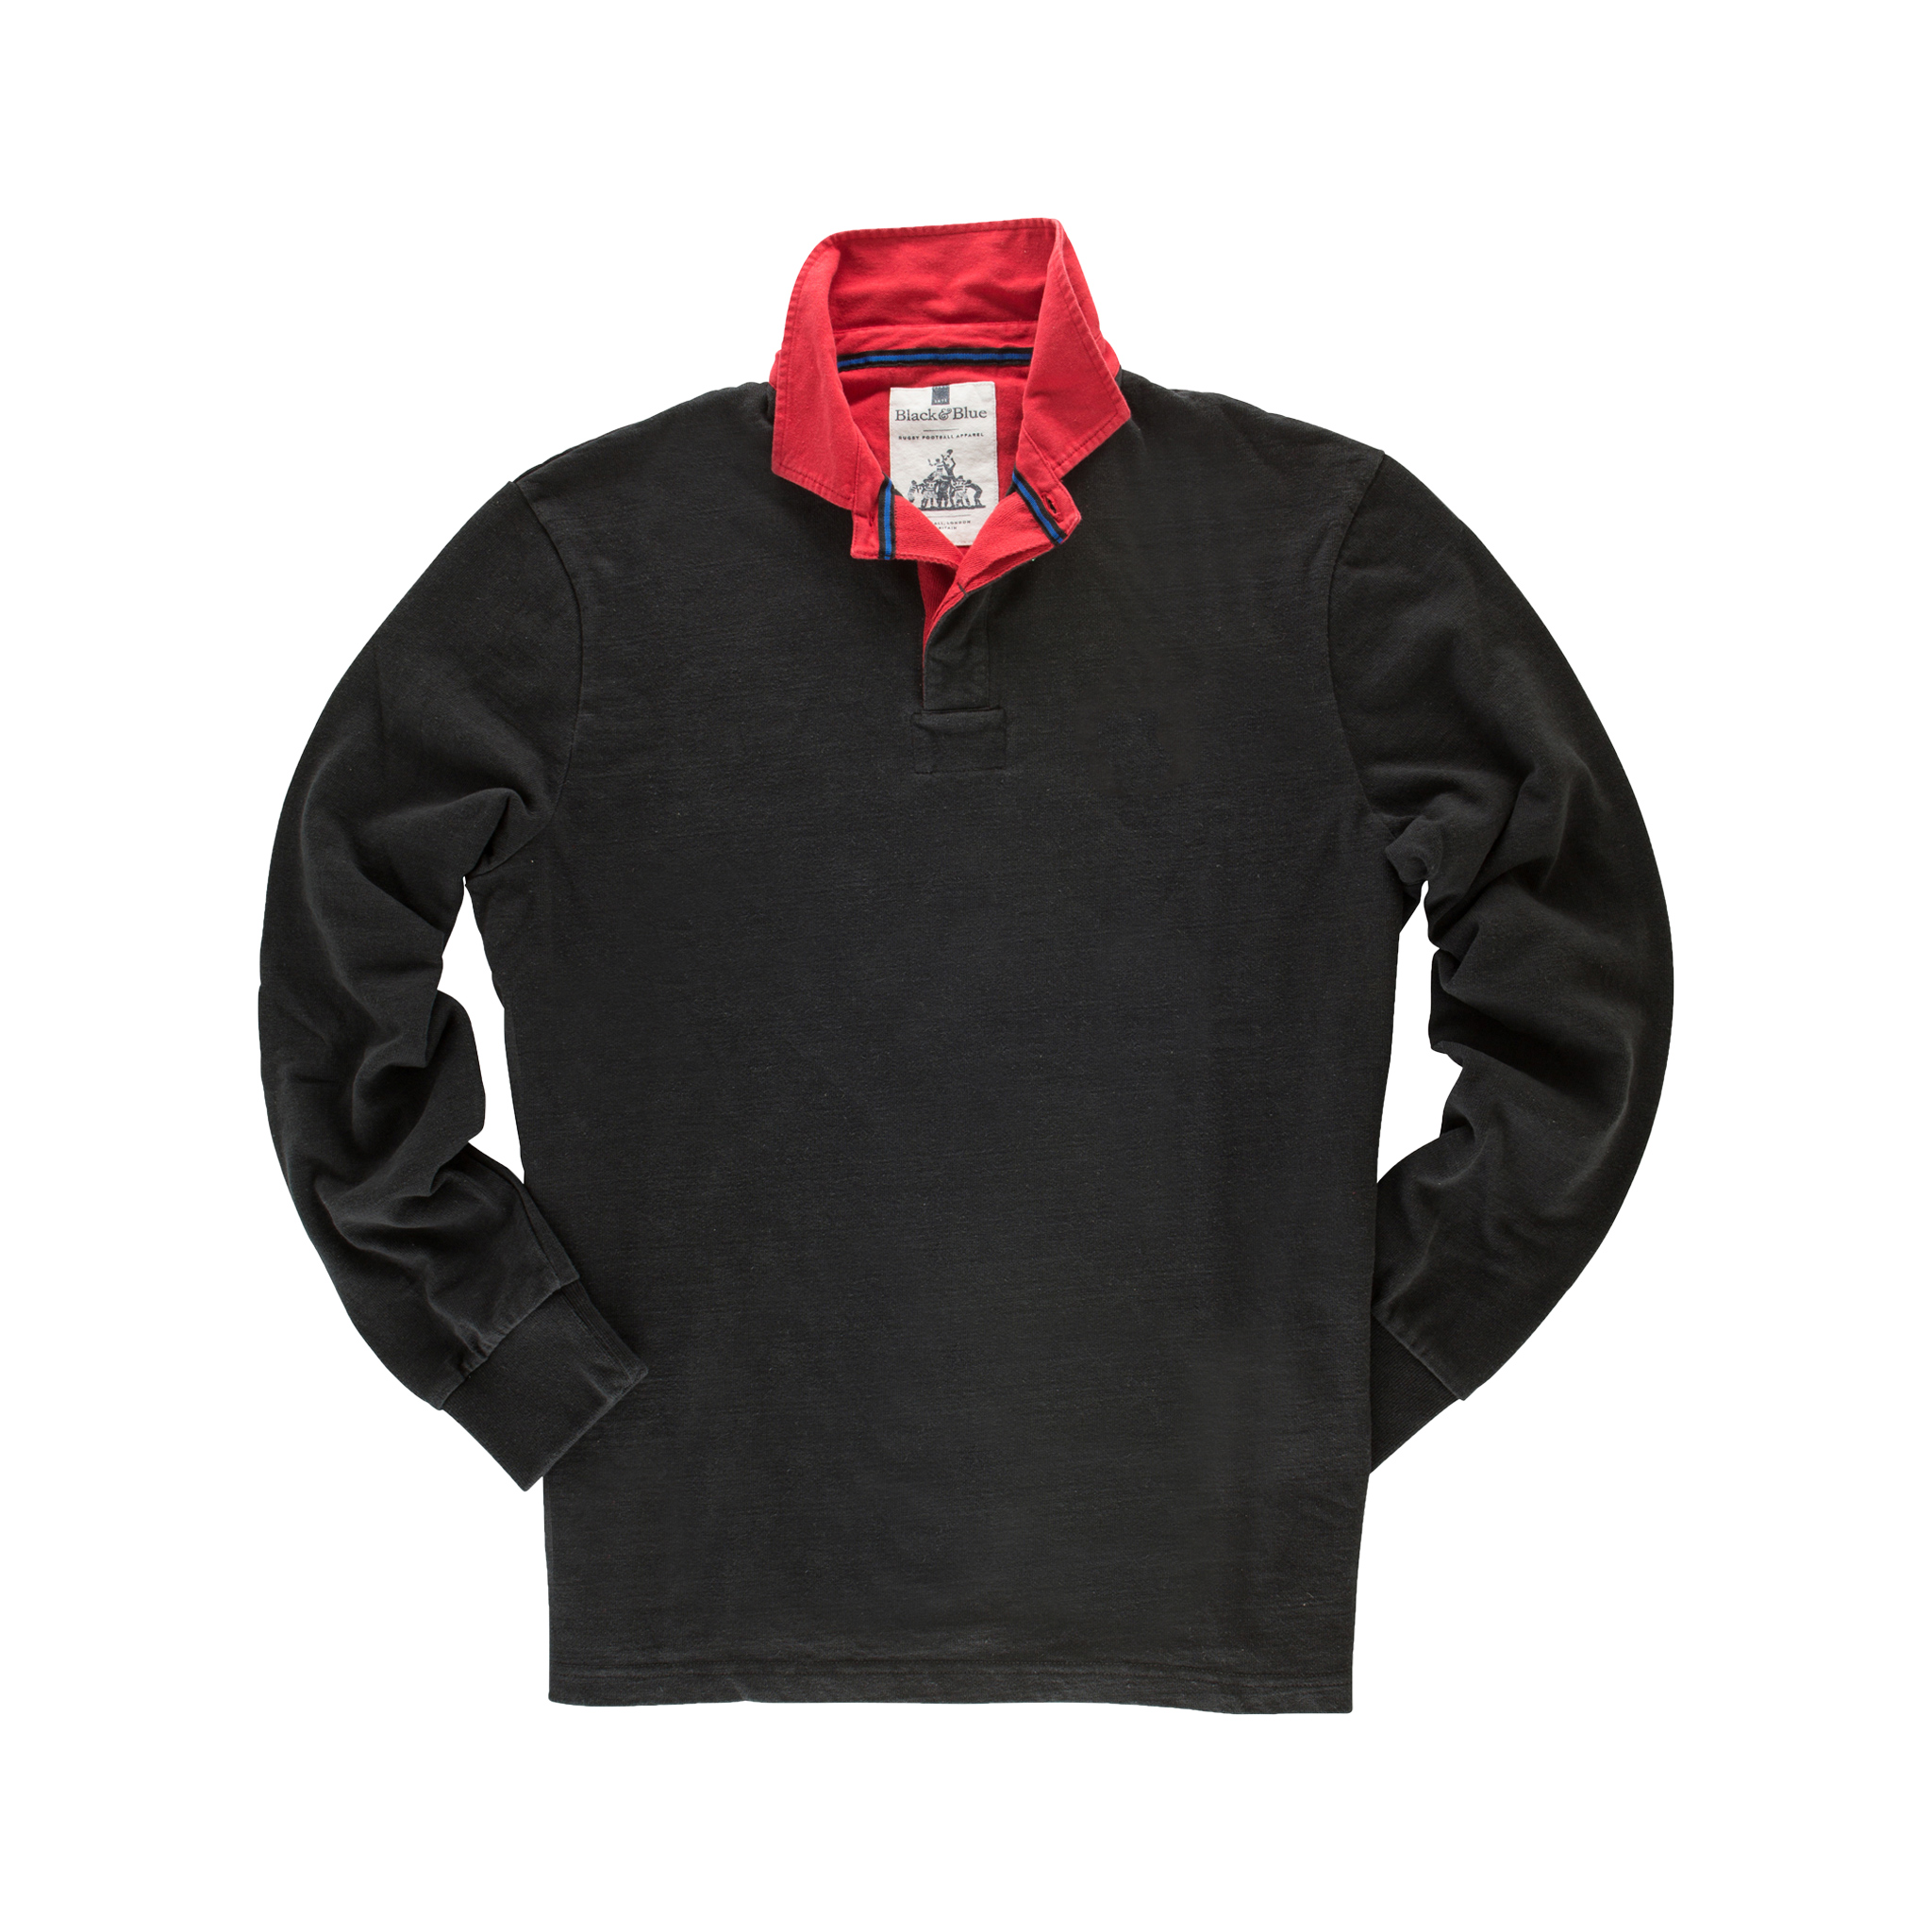 Classic Black 1871 Vintage Rugby Shirt with Red Collar